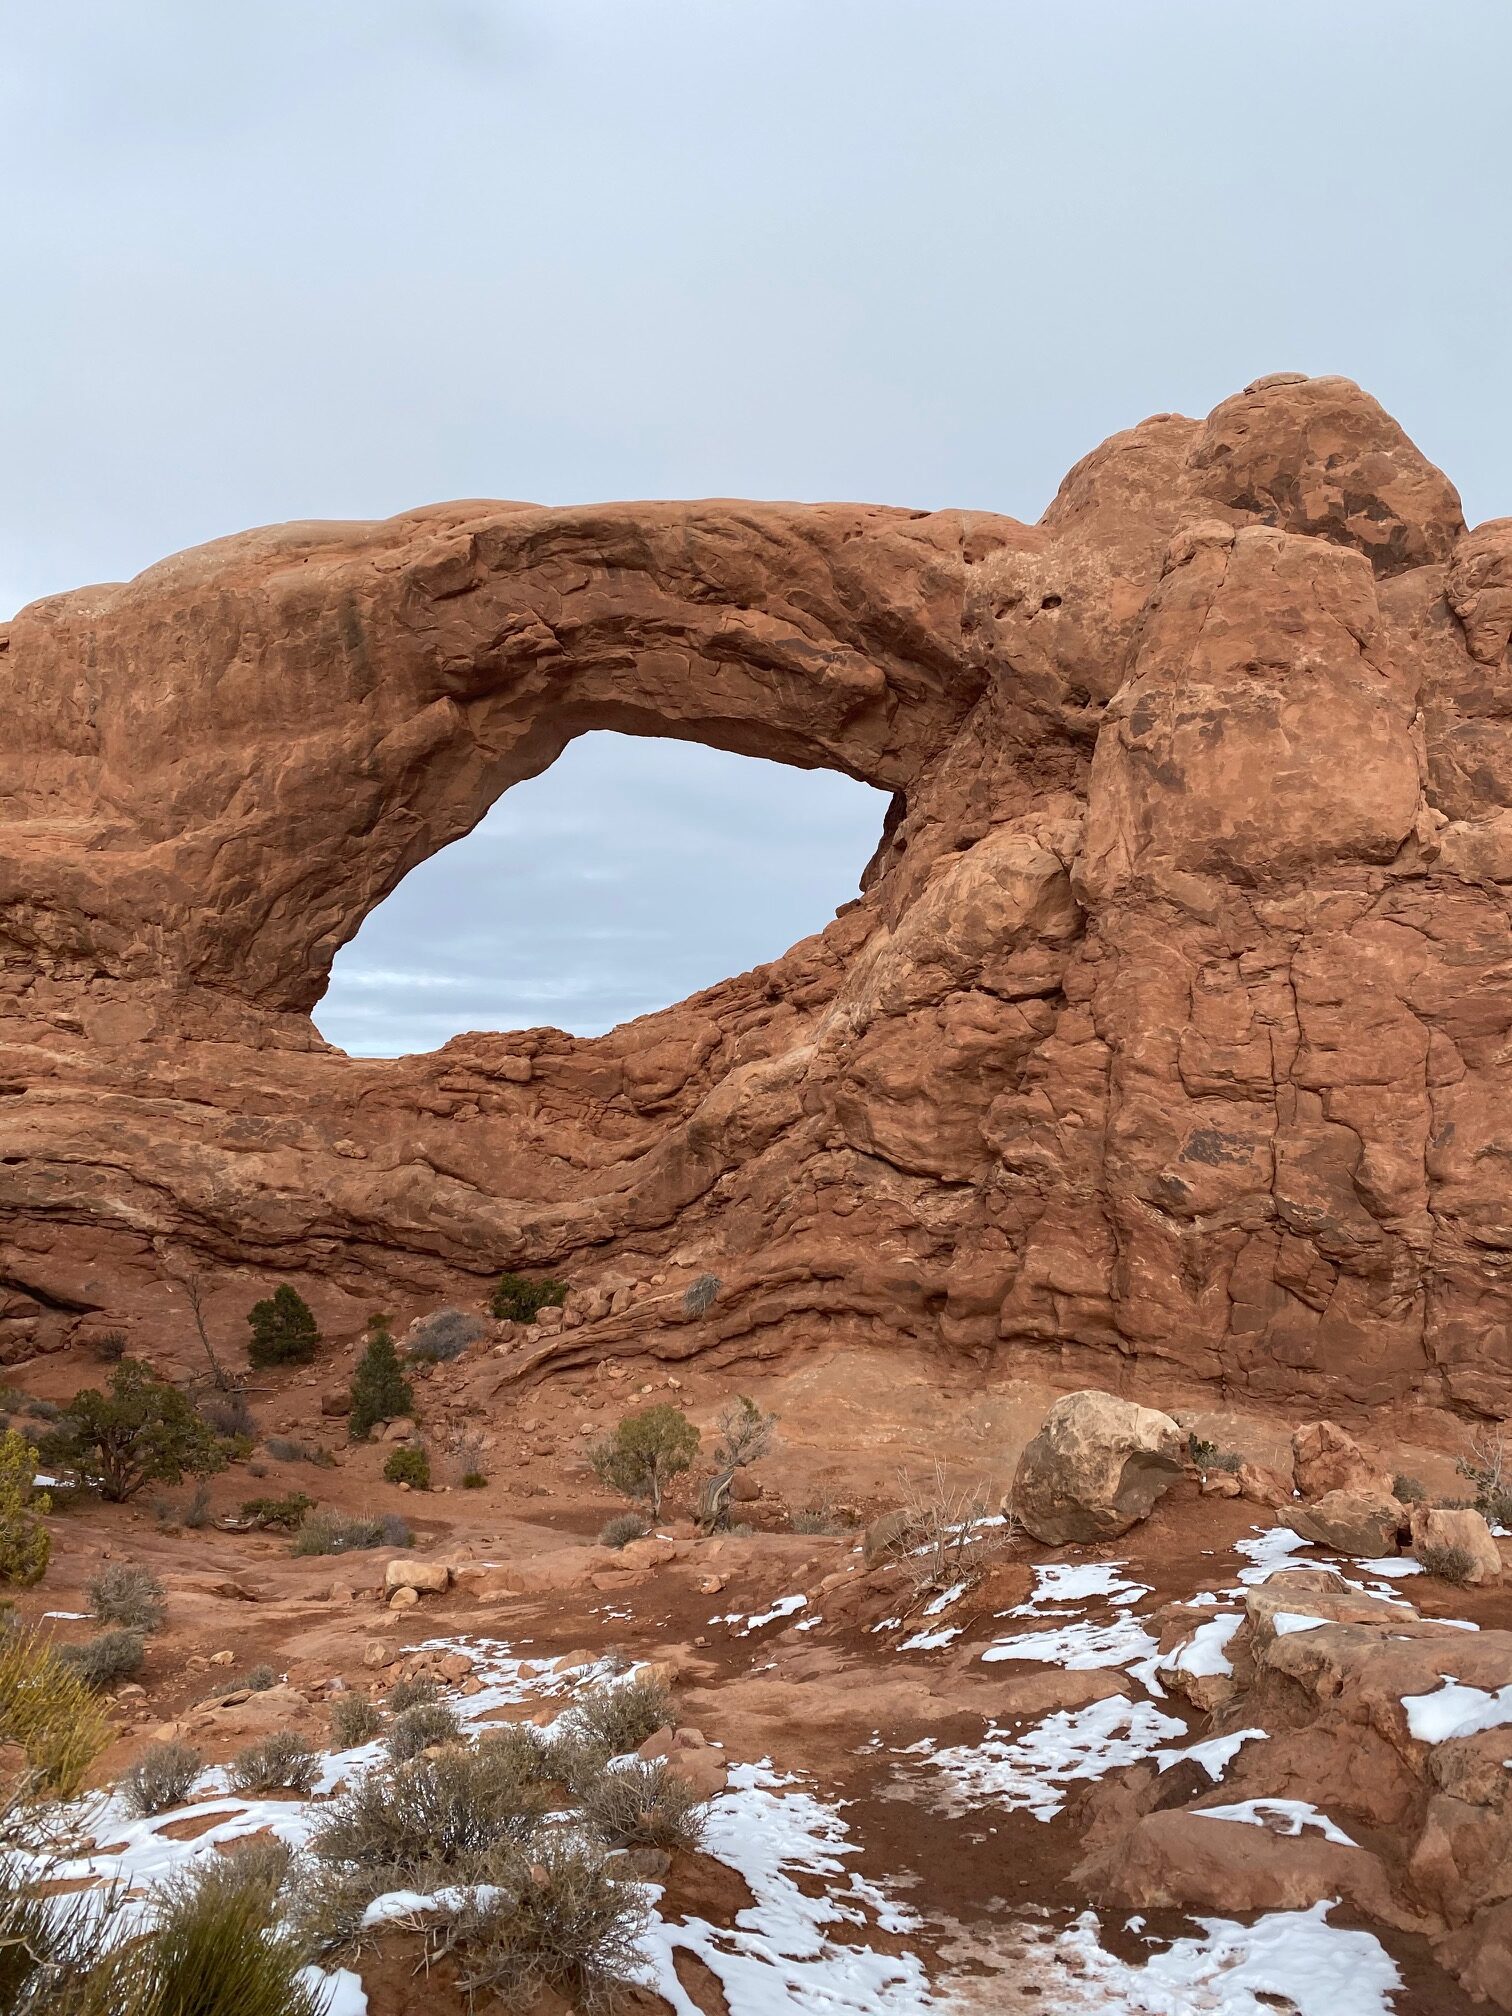 One of the Window arches on a cloudy day.